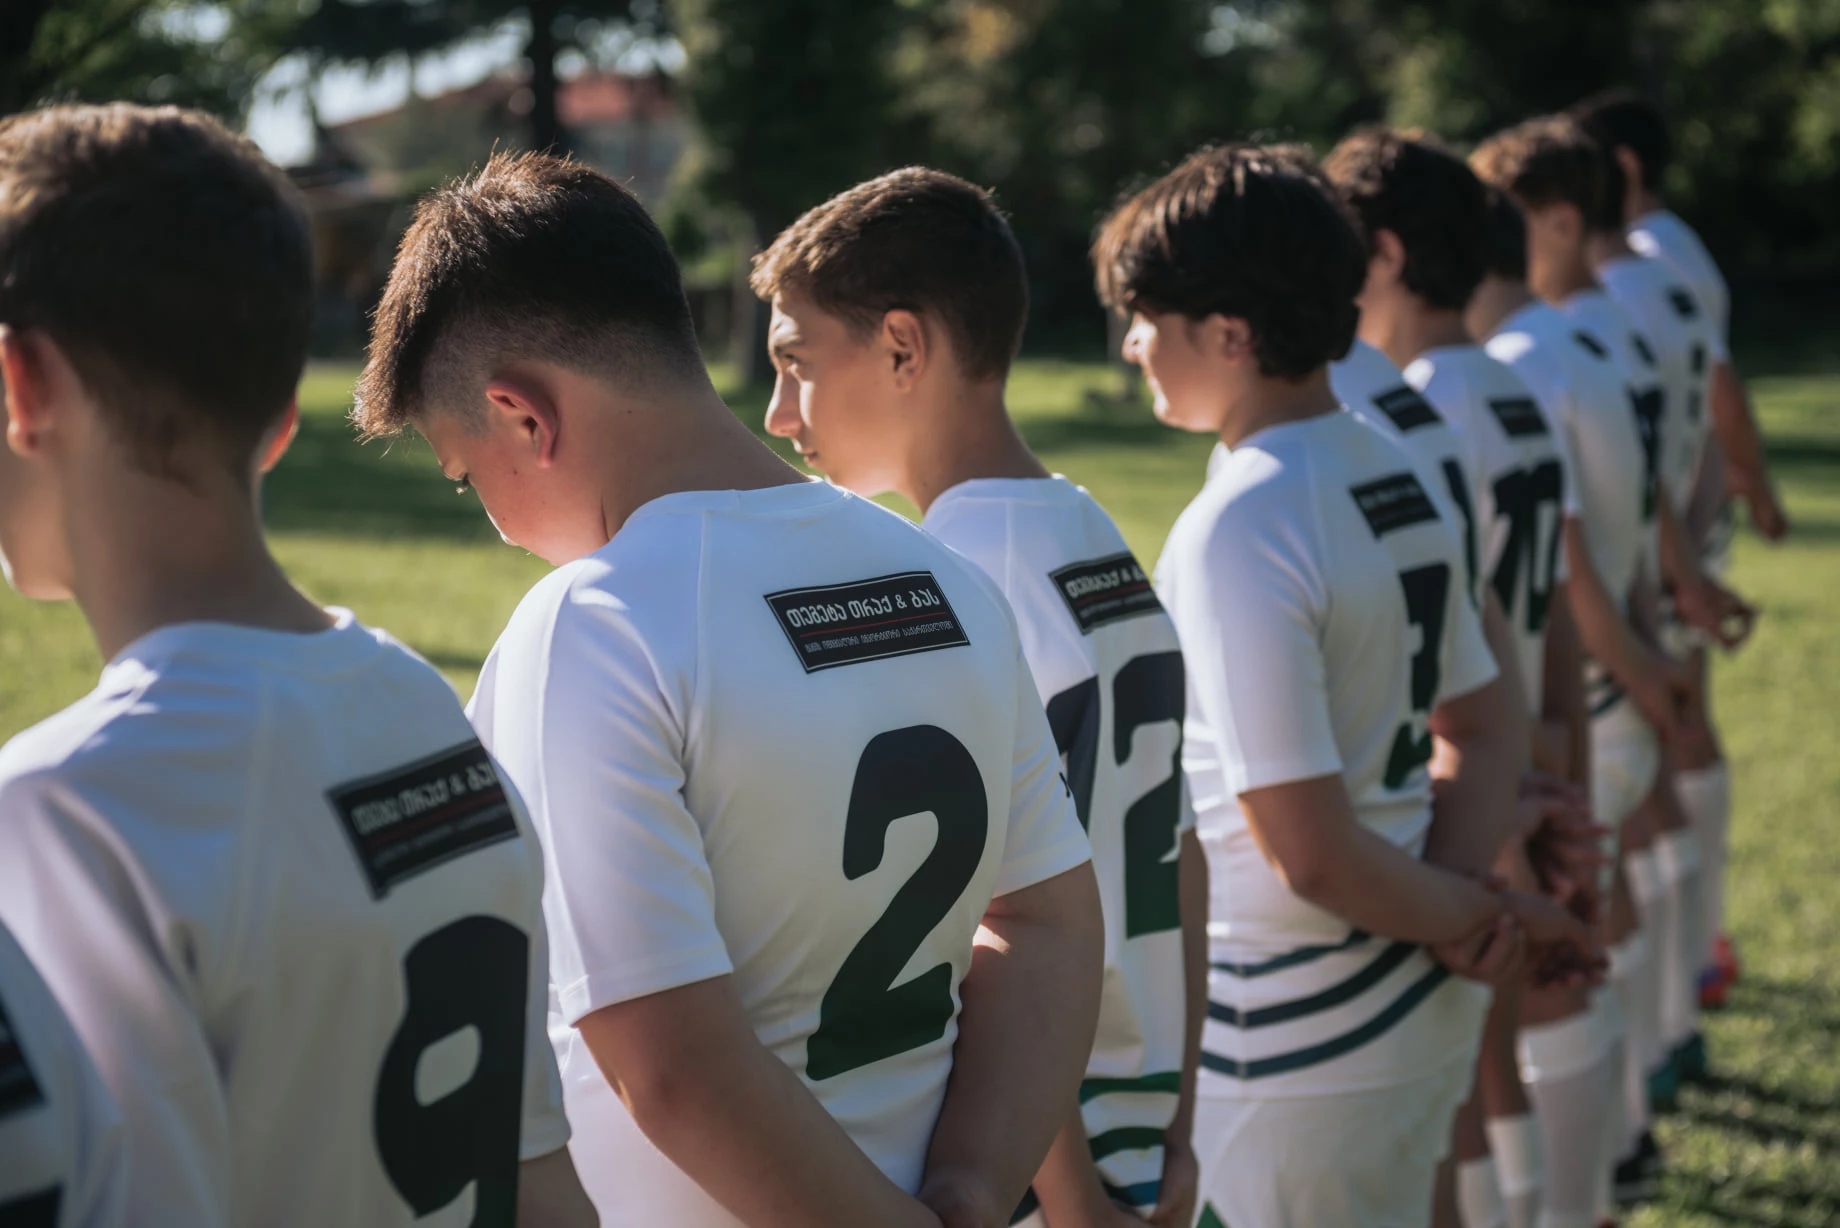 on-september-27-a-presentation-of-the-new-sports-uniform-of-sukhumi-rugby-club-took-place